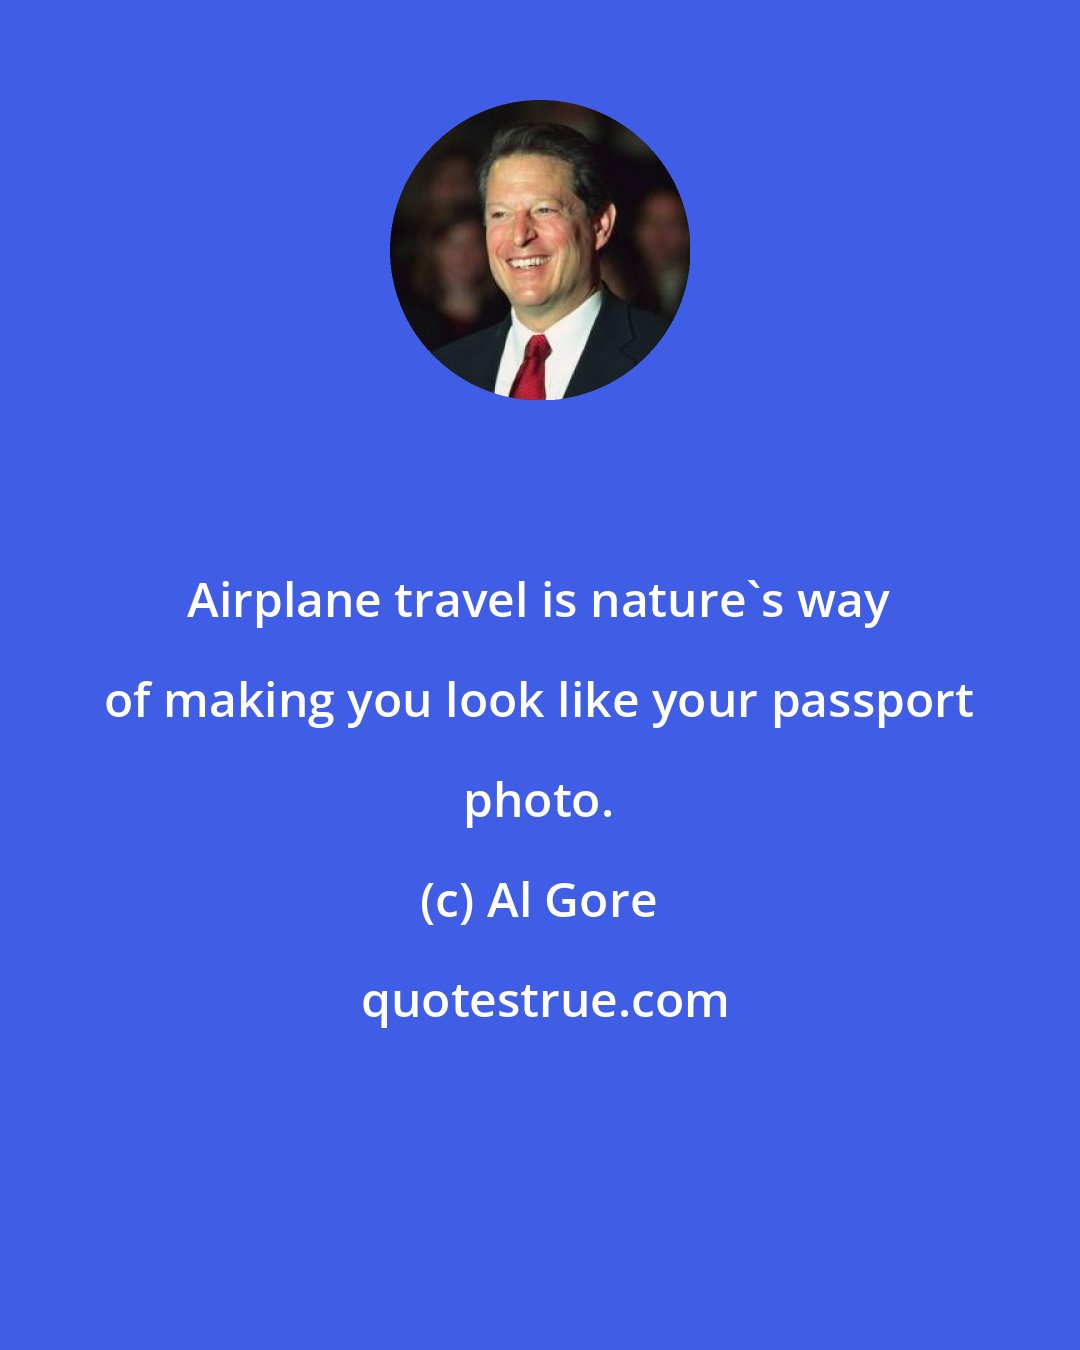 Al Gore: Airplane travel is nature's way of making you look like your passport photo.